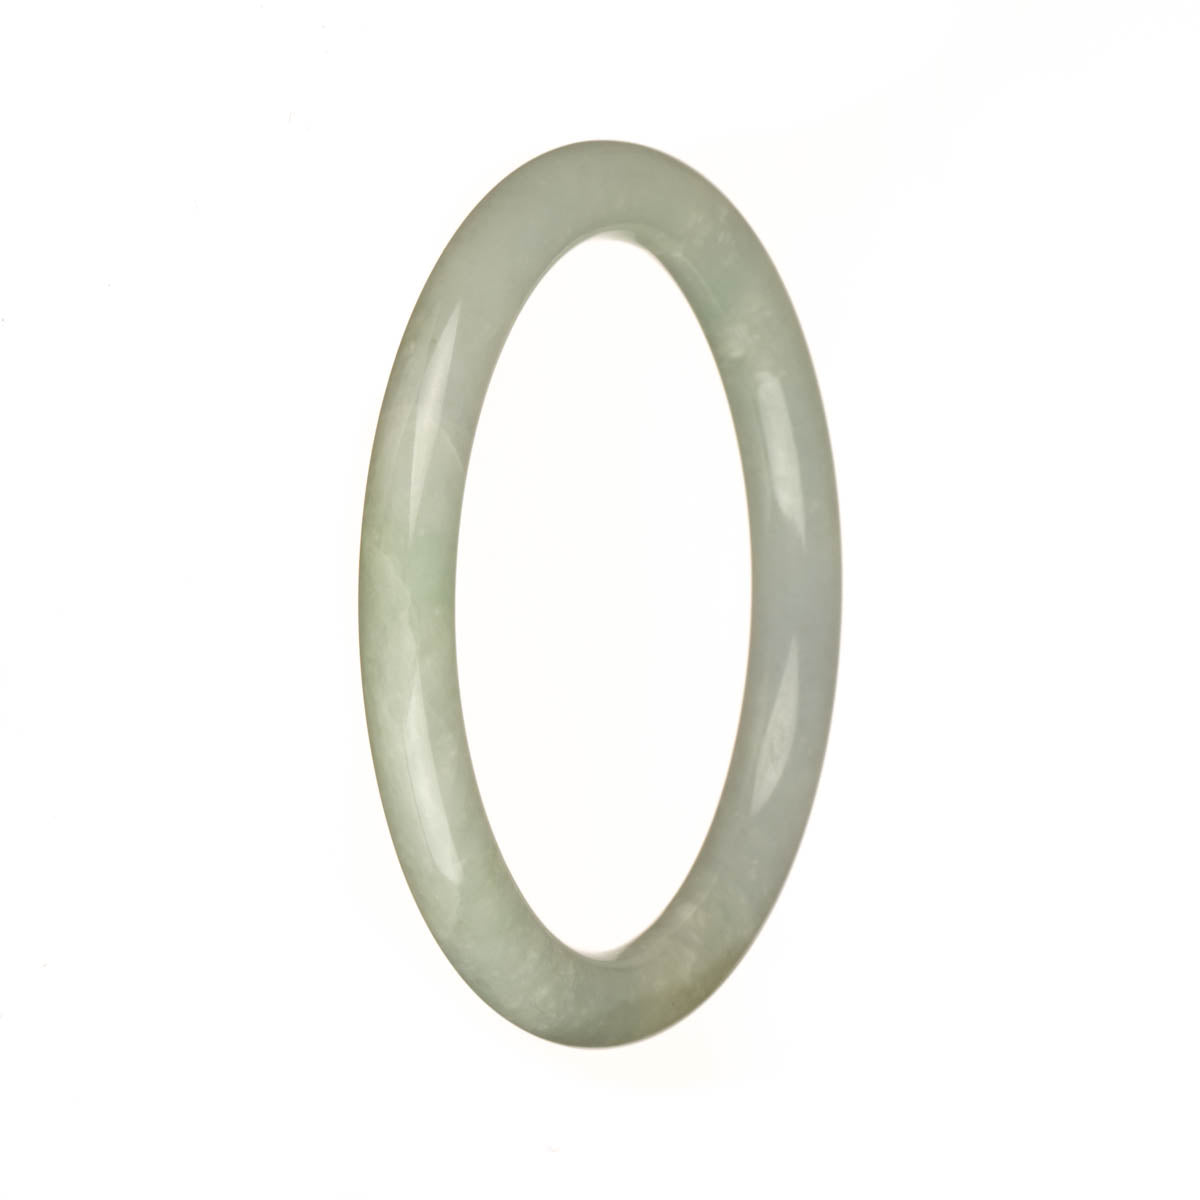 Authentic Natural White with Green Spots Jadeite Jade Bracelet - 56mm Petite Round